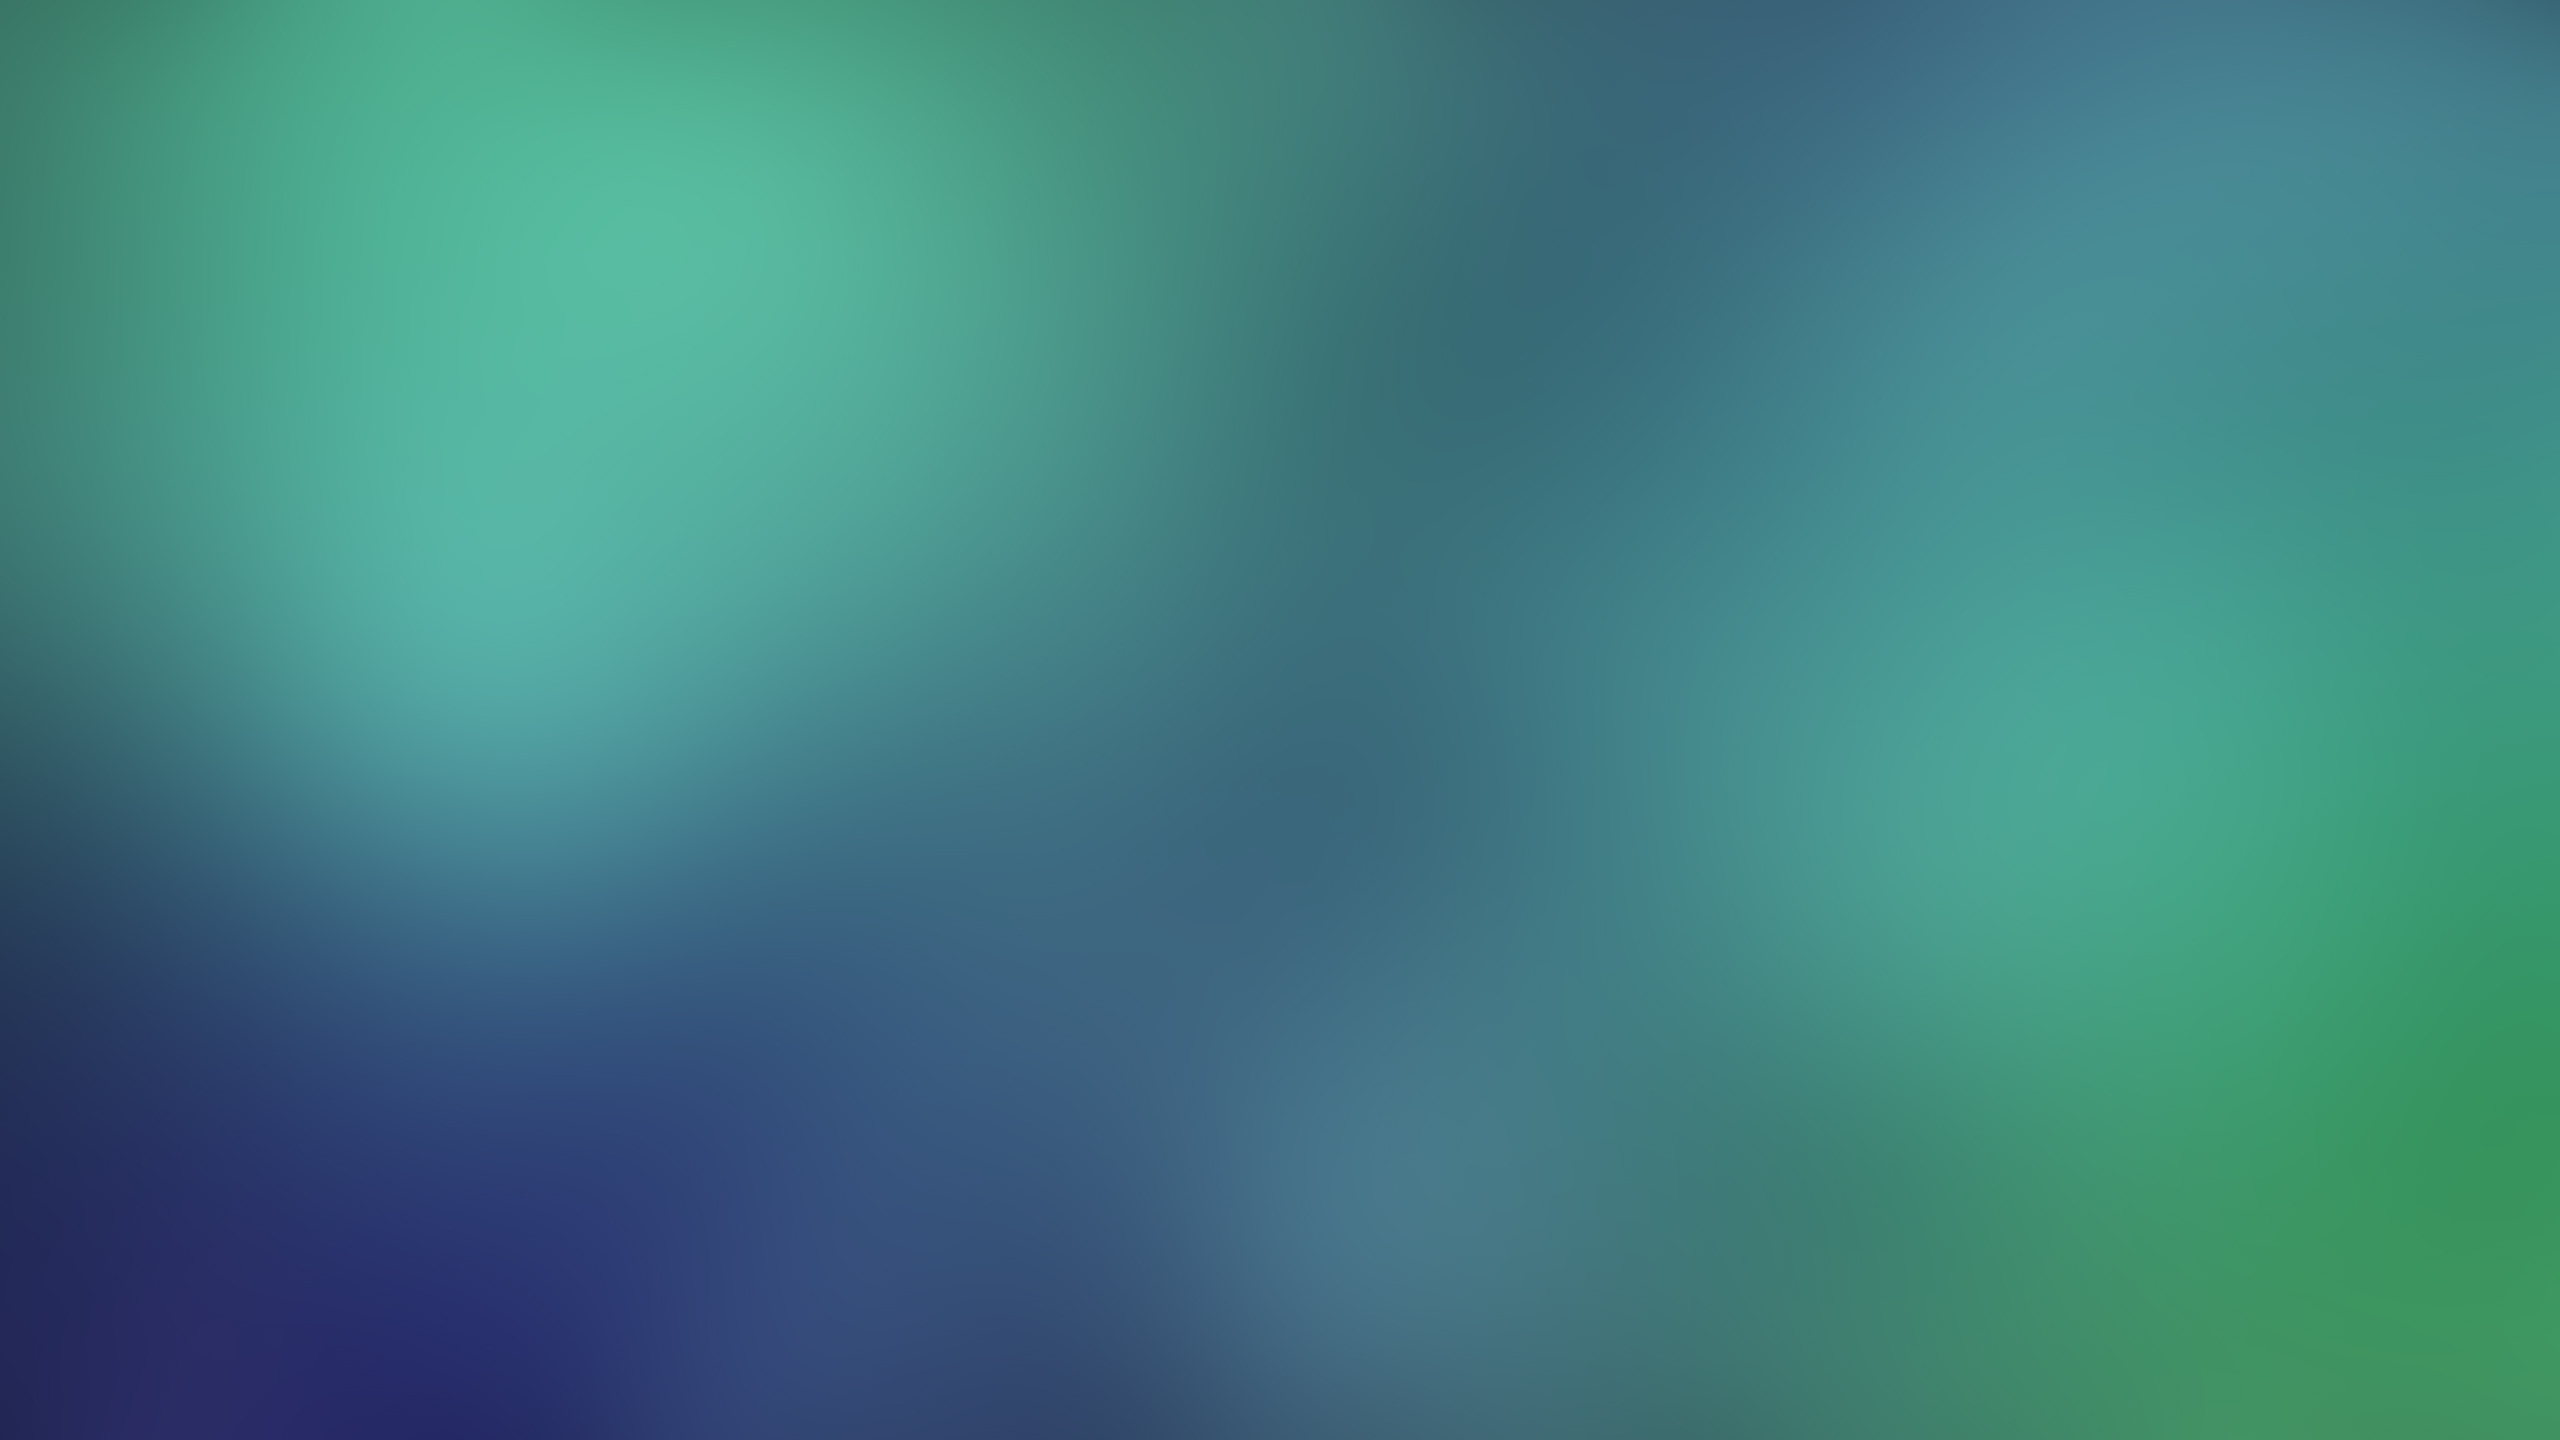 2K Abstract Wallpapers, blue-green abstract background.